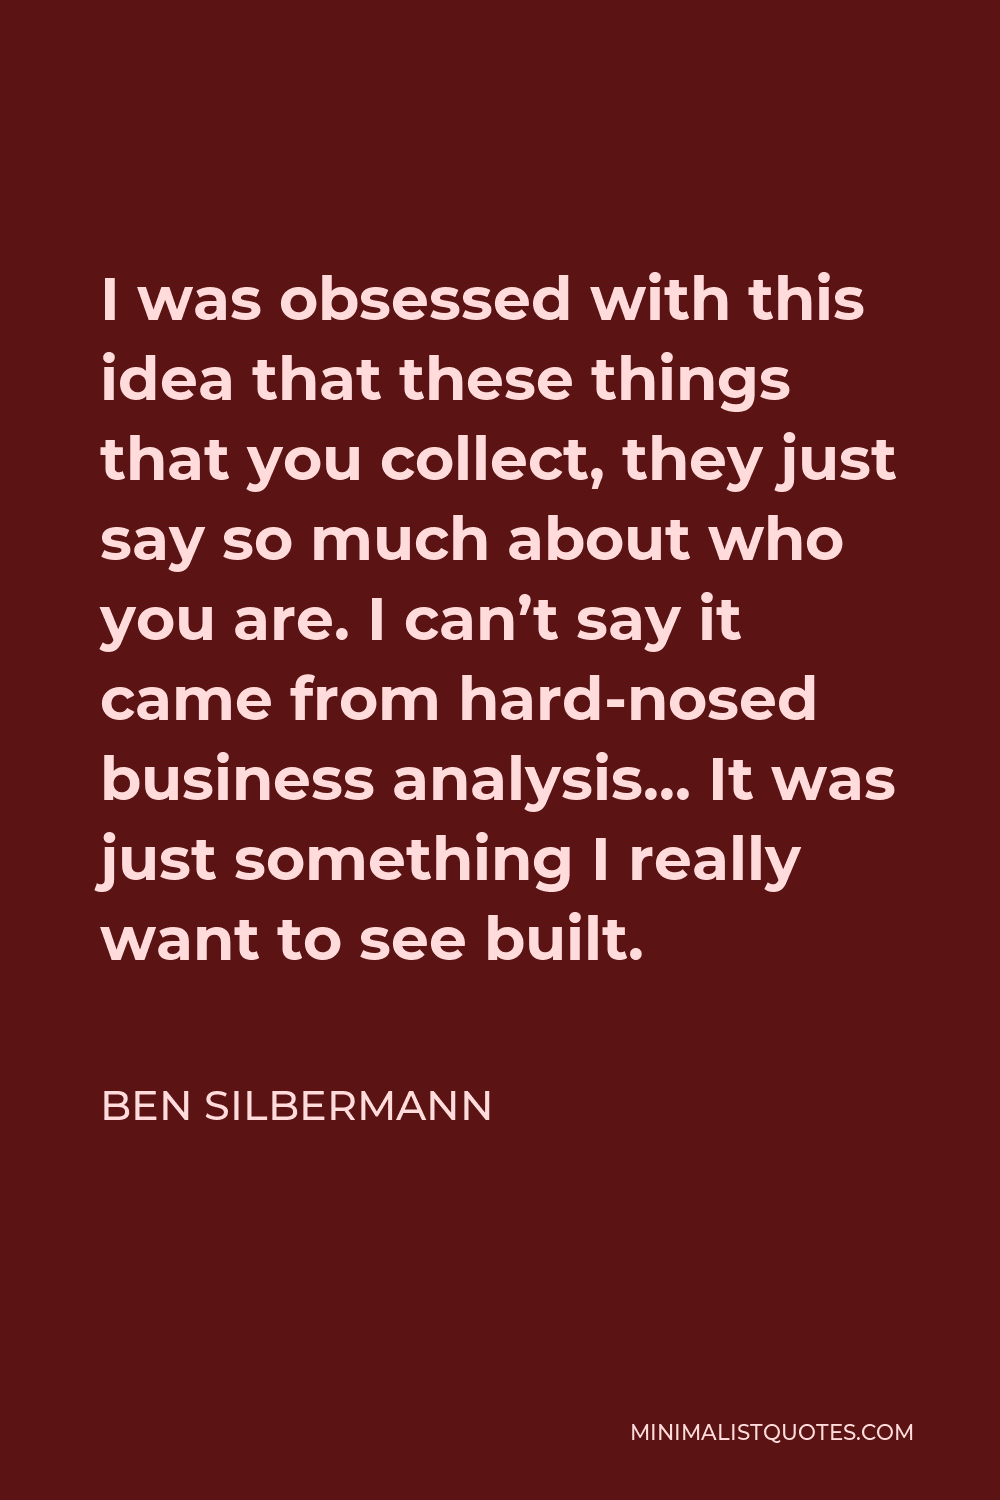 Ben Silbermann Quote - I was obsessed with this idea that these things that you collect, they just say so much about who you are. I can’t say it came from hard-nosed business analysis… It was just something I really want to see built.